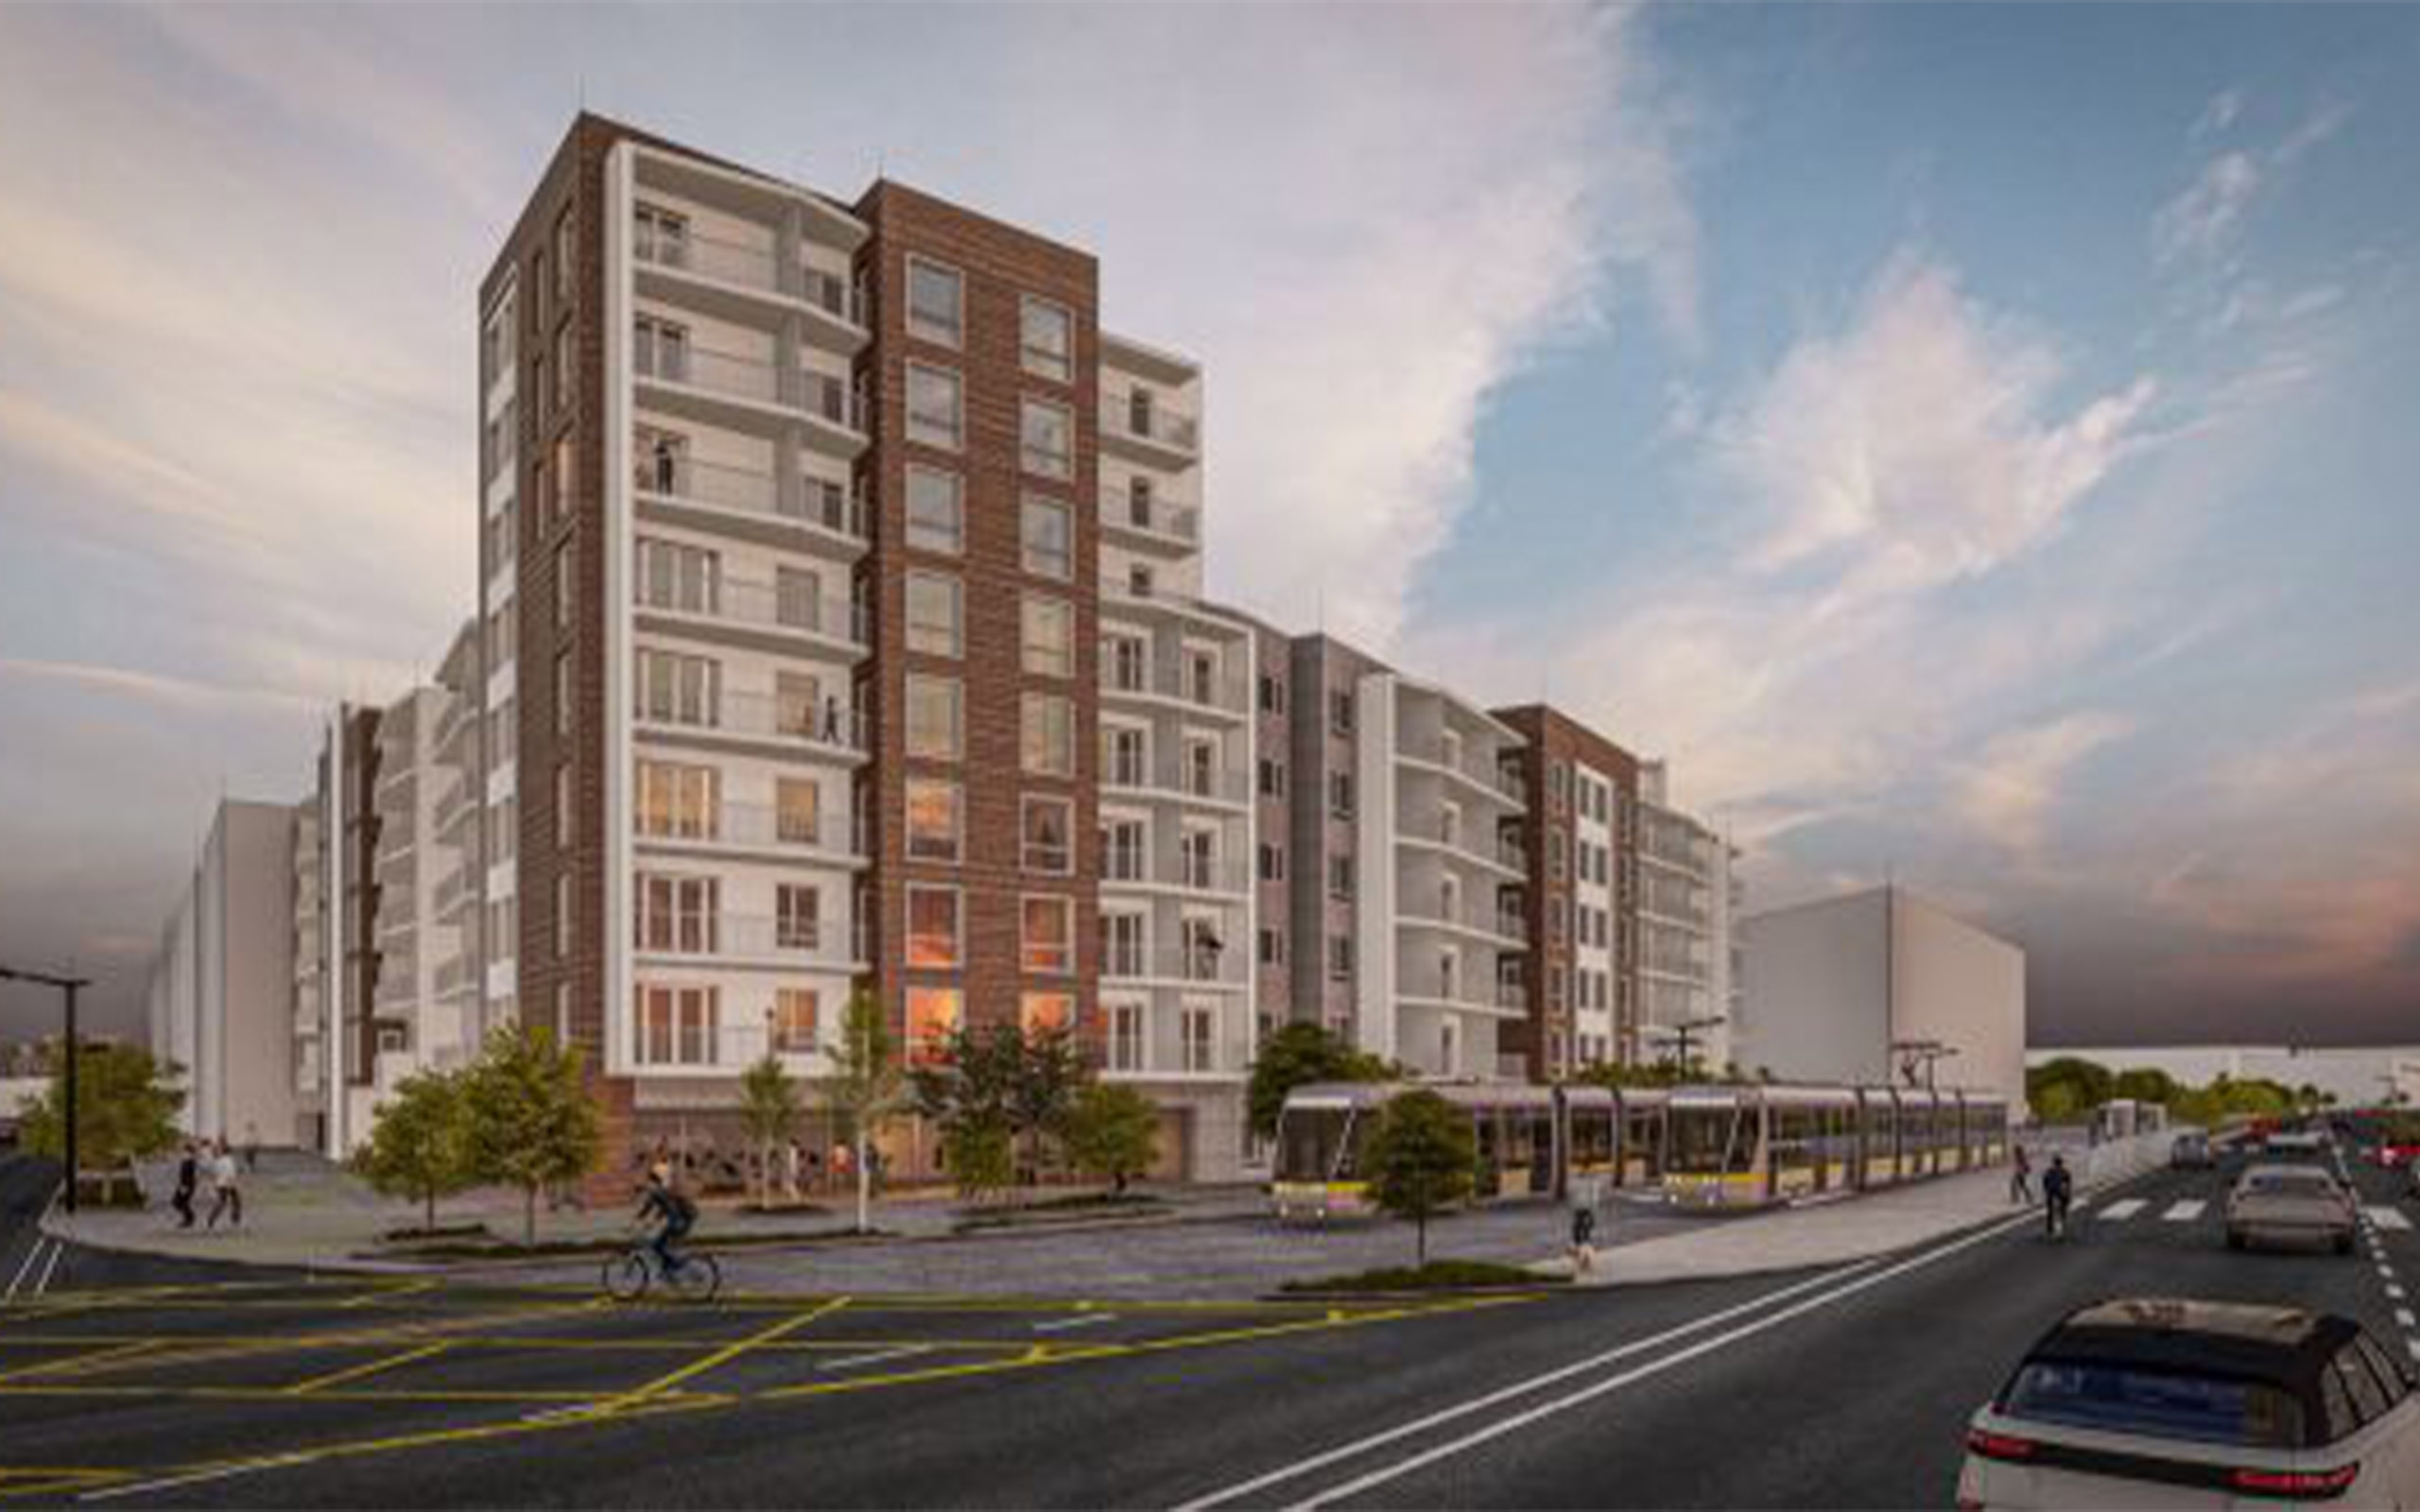 196-Units-at-The-Avenue-Cookstown-Crescent-Tallaght.-Image-Credit-CW-O’Brien-Architects.